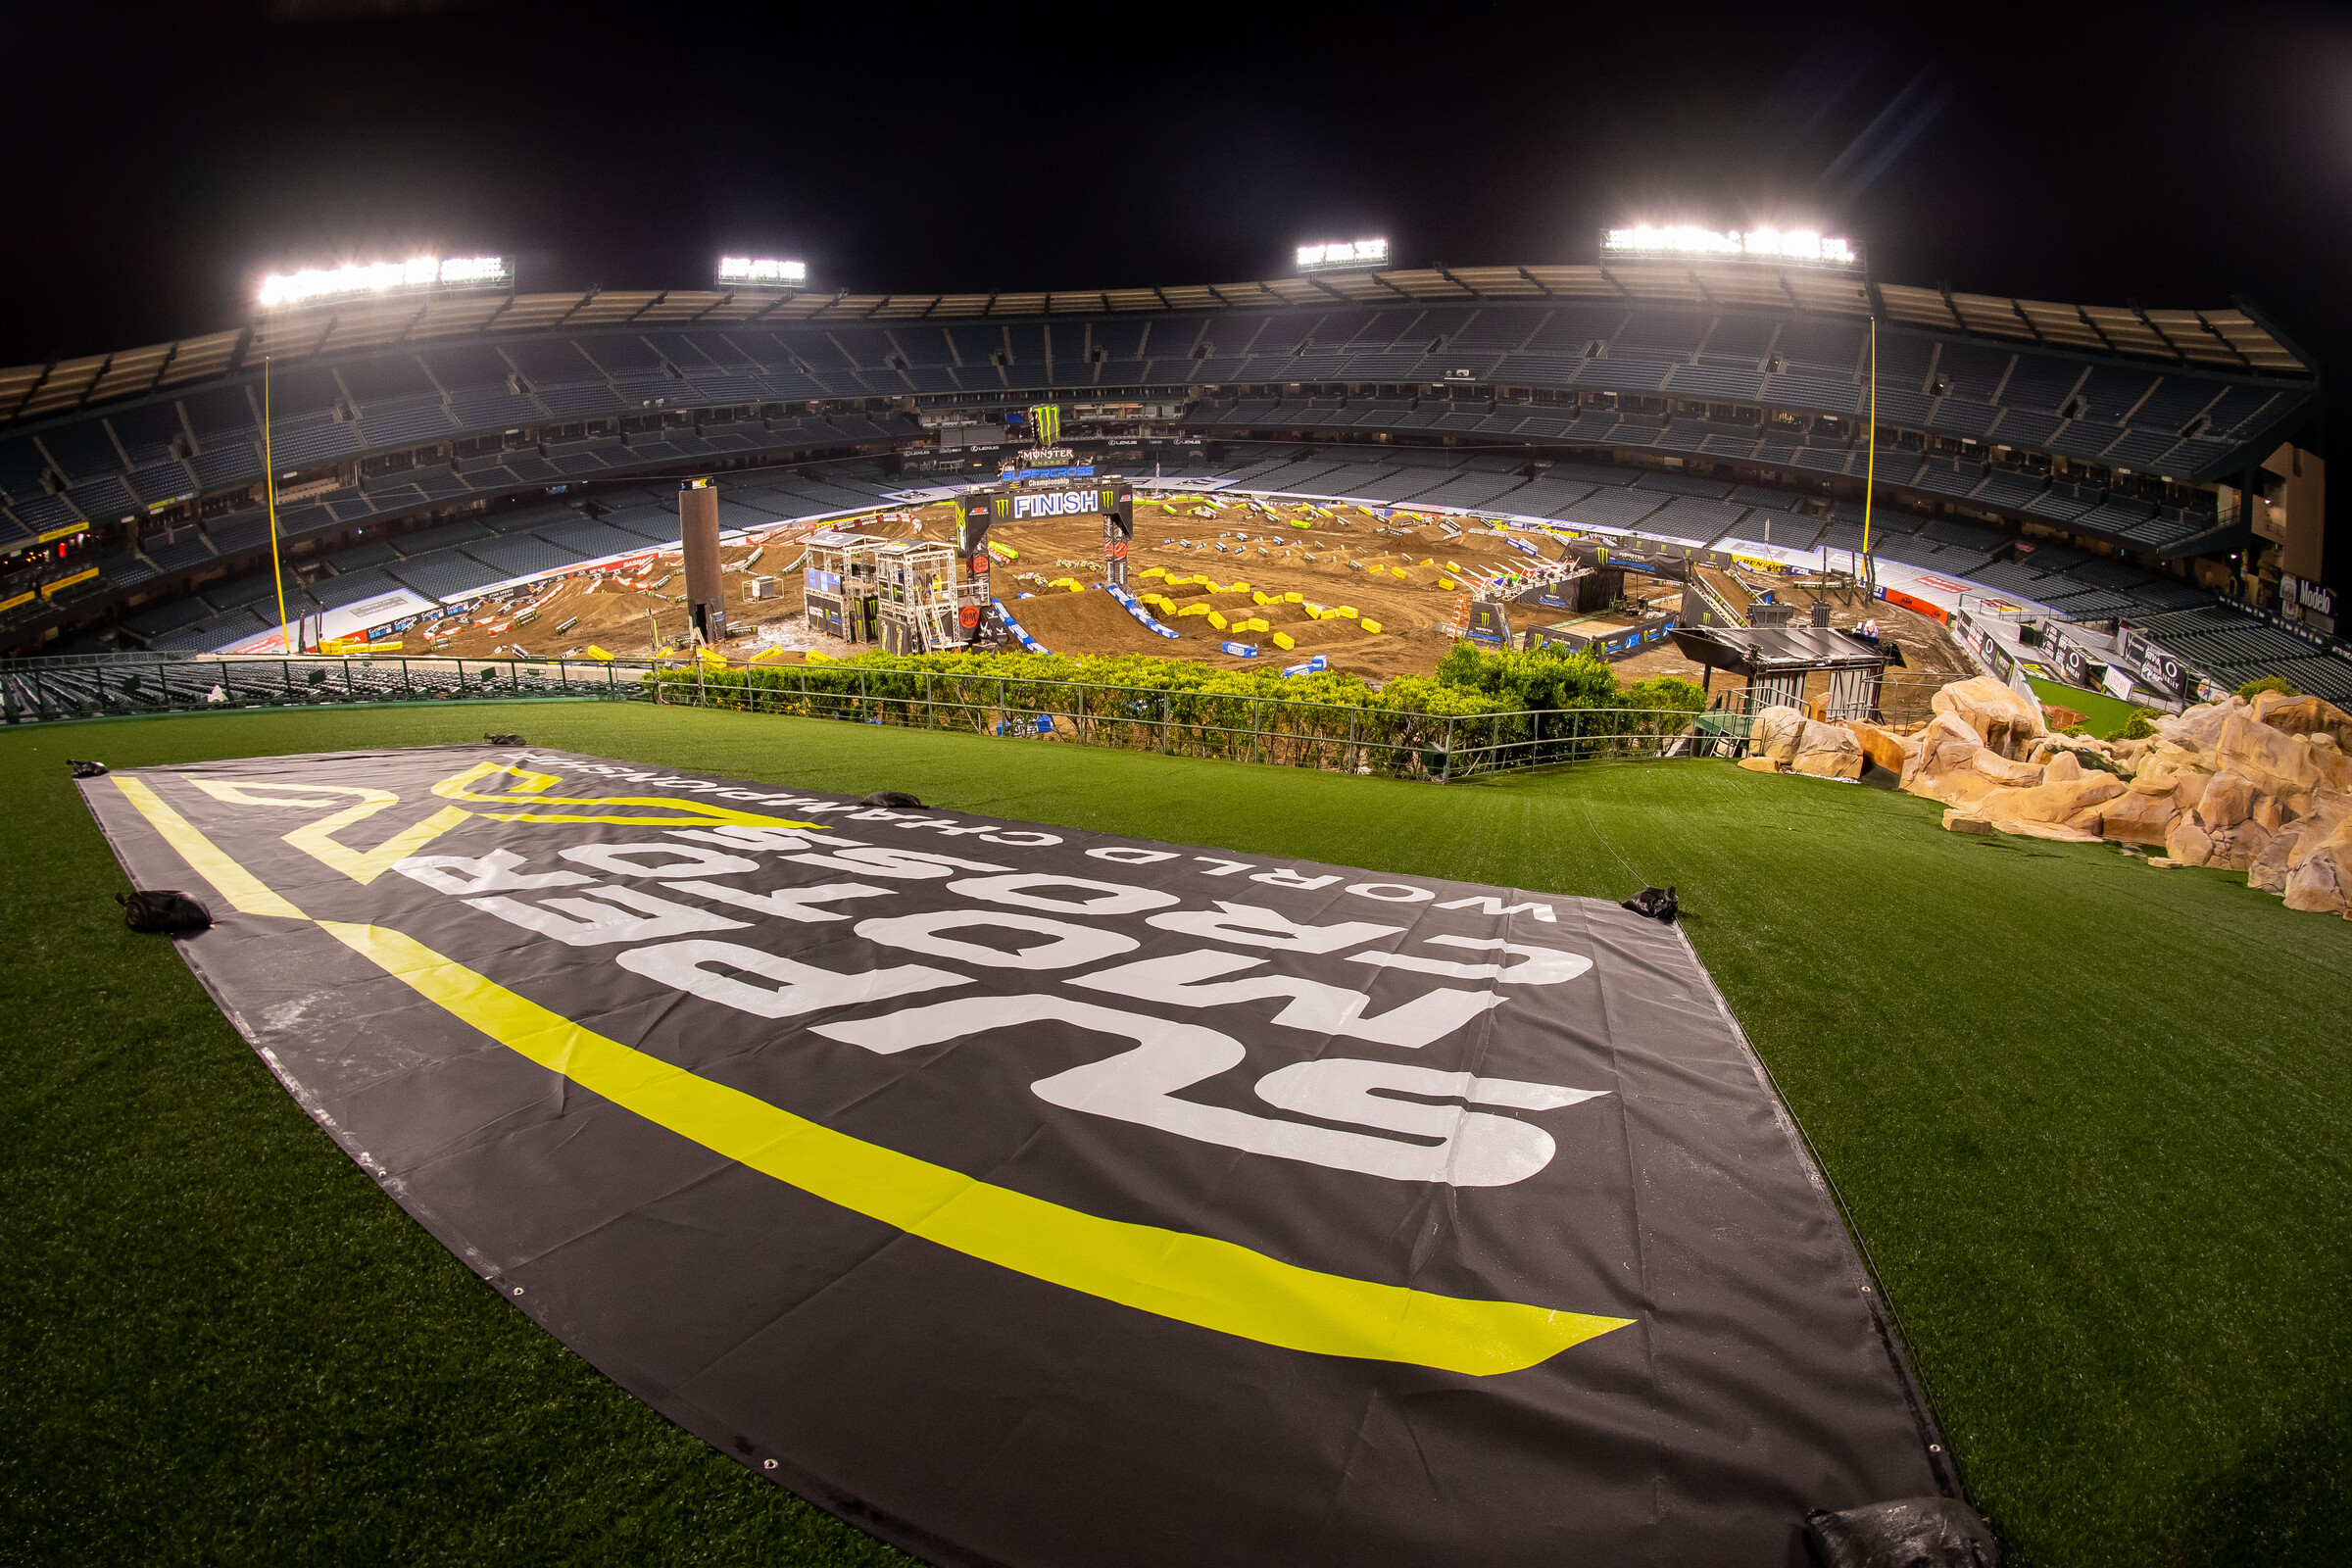 supercross 2022 forty six days till the gate drops in Anaheim, California on the 2024 Monster Energy Supercross Year and the SuperMotocross Entire world Championship sequence.